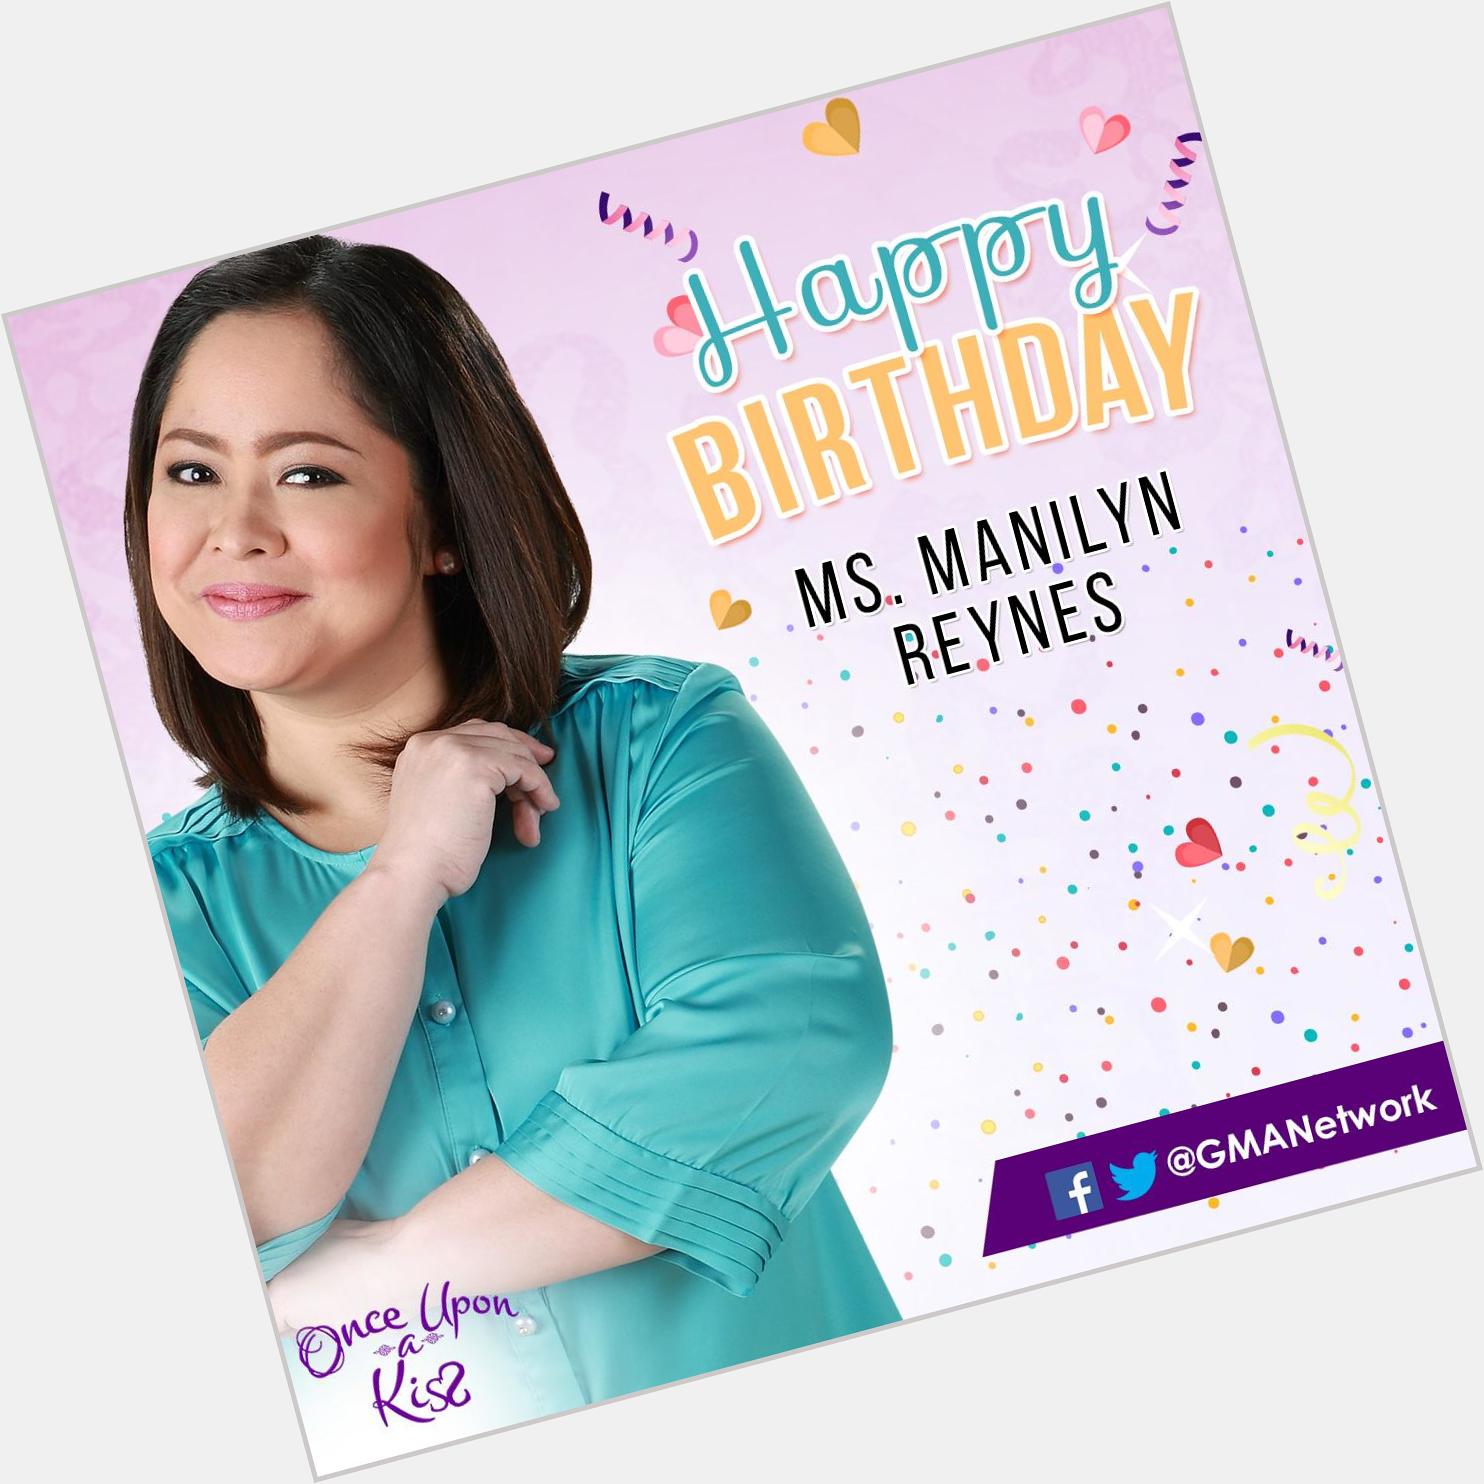 \" Happy birthday, Ms. Manilyn Reynes! Much love from your OUAK family! :) 